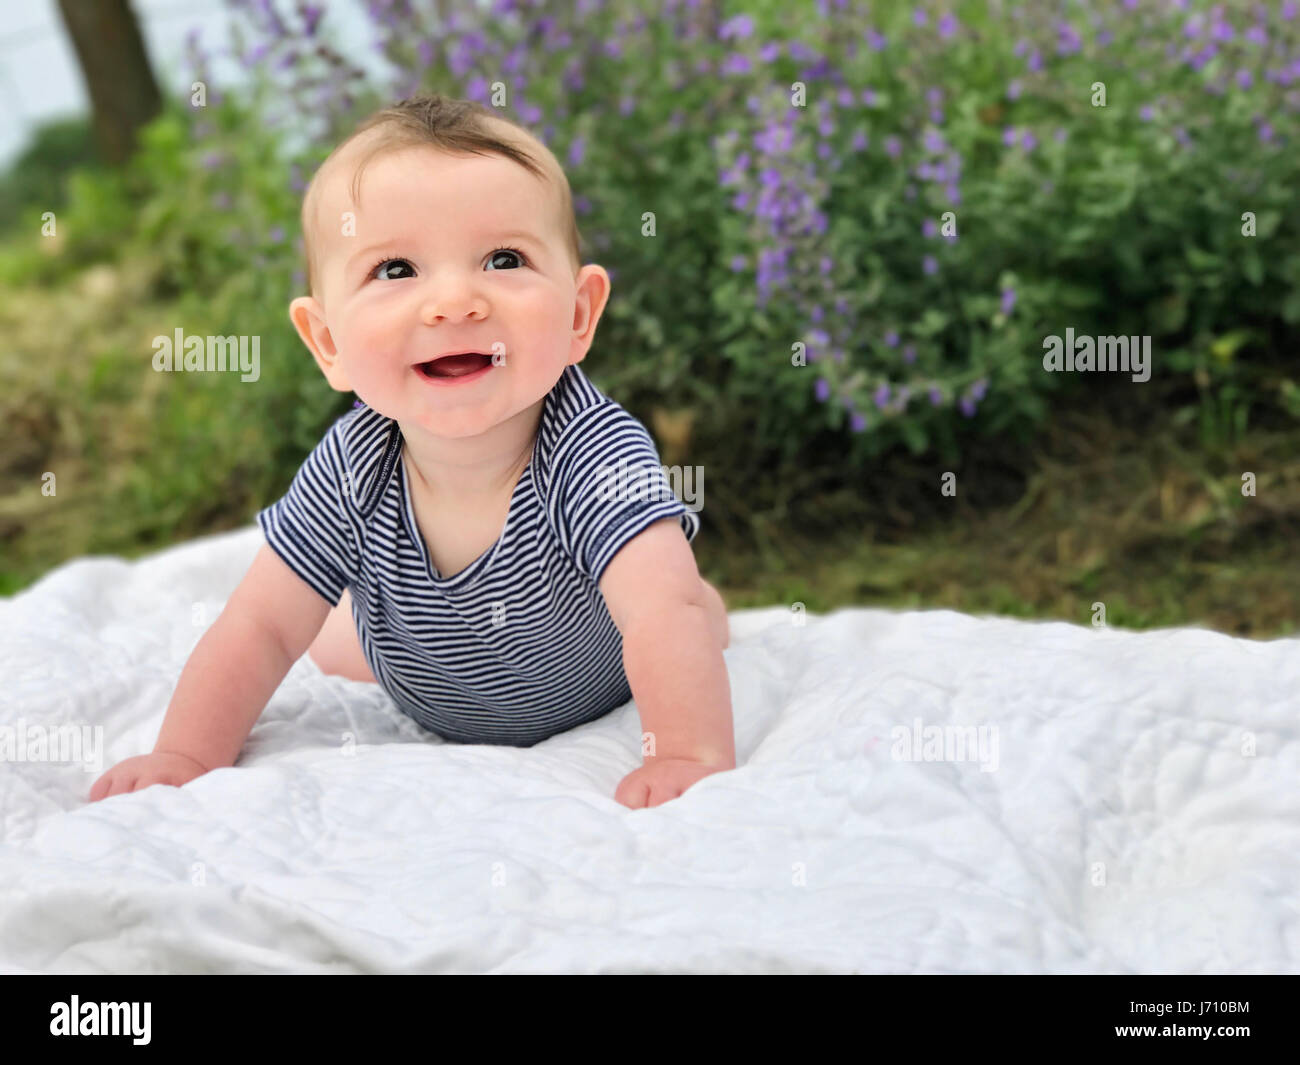 cute happy baby boy laying on blanket looking up Stock Photo